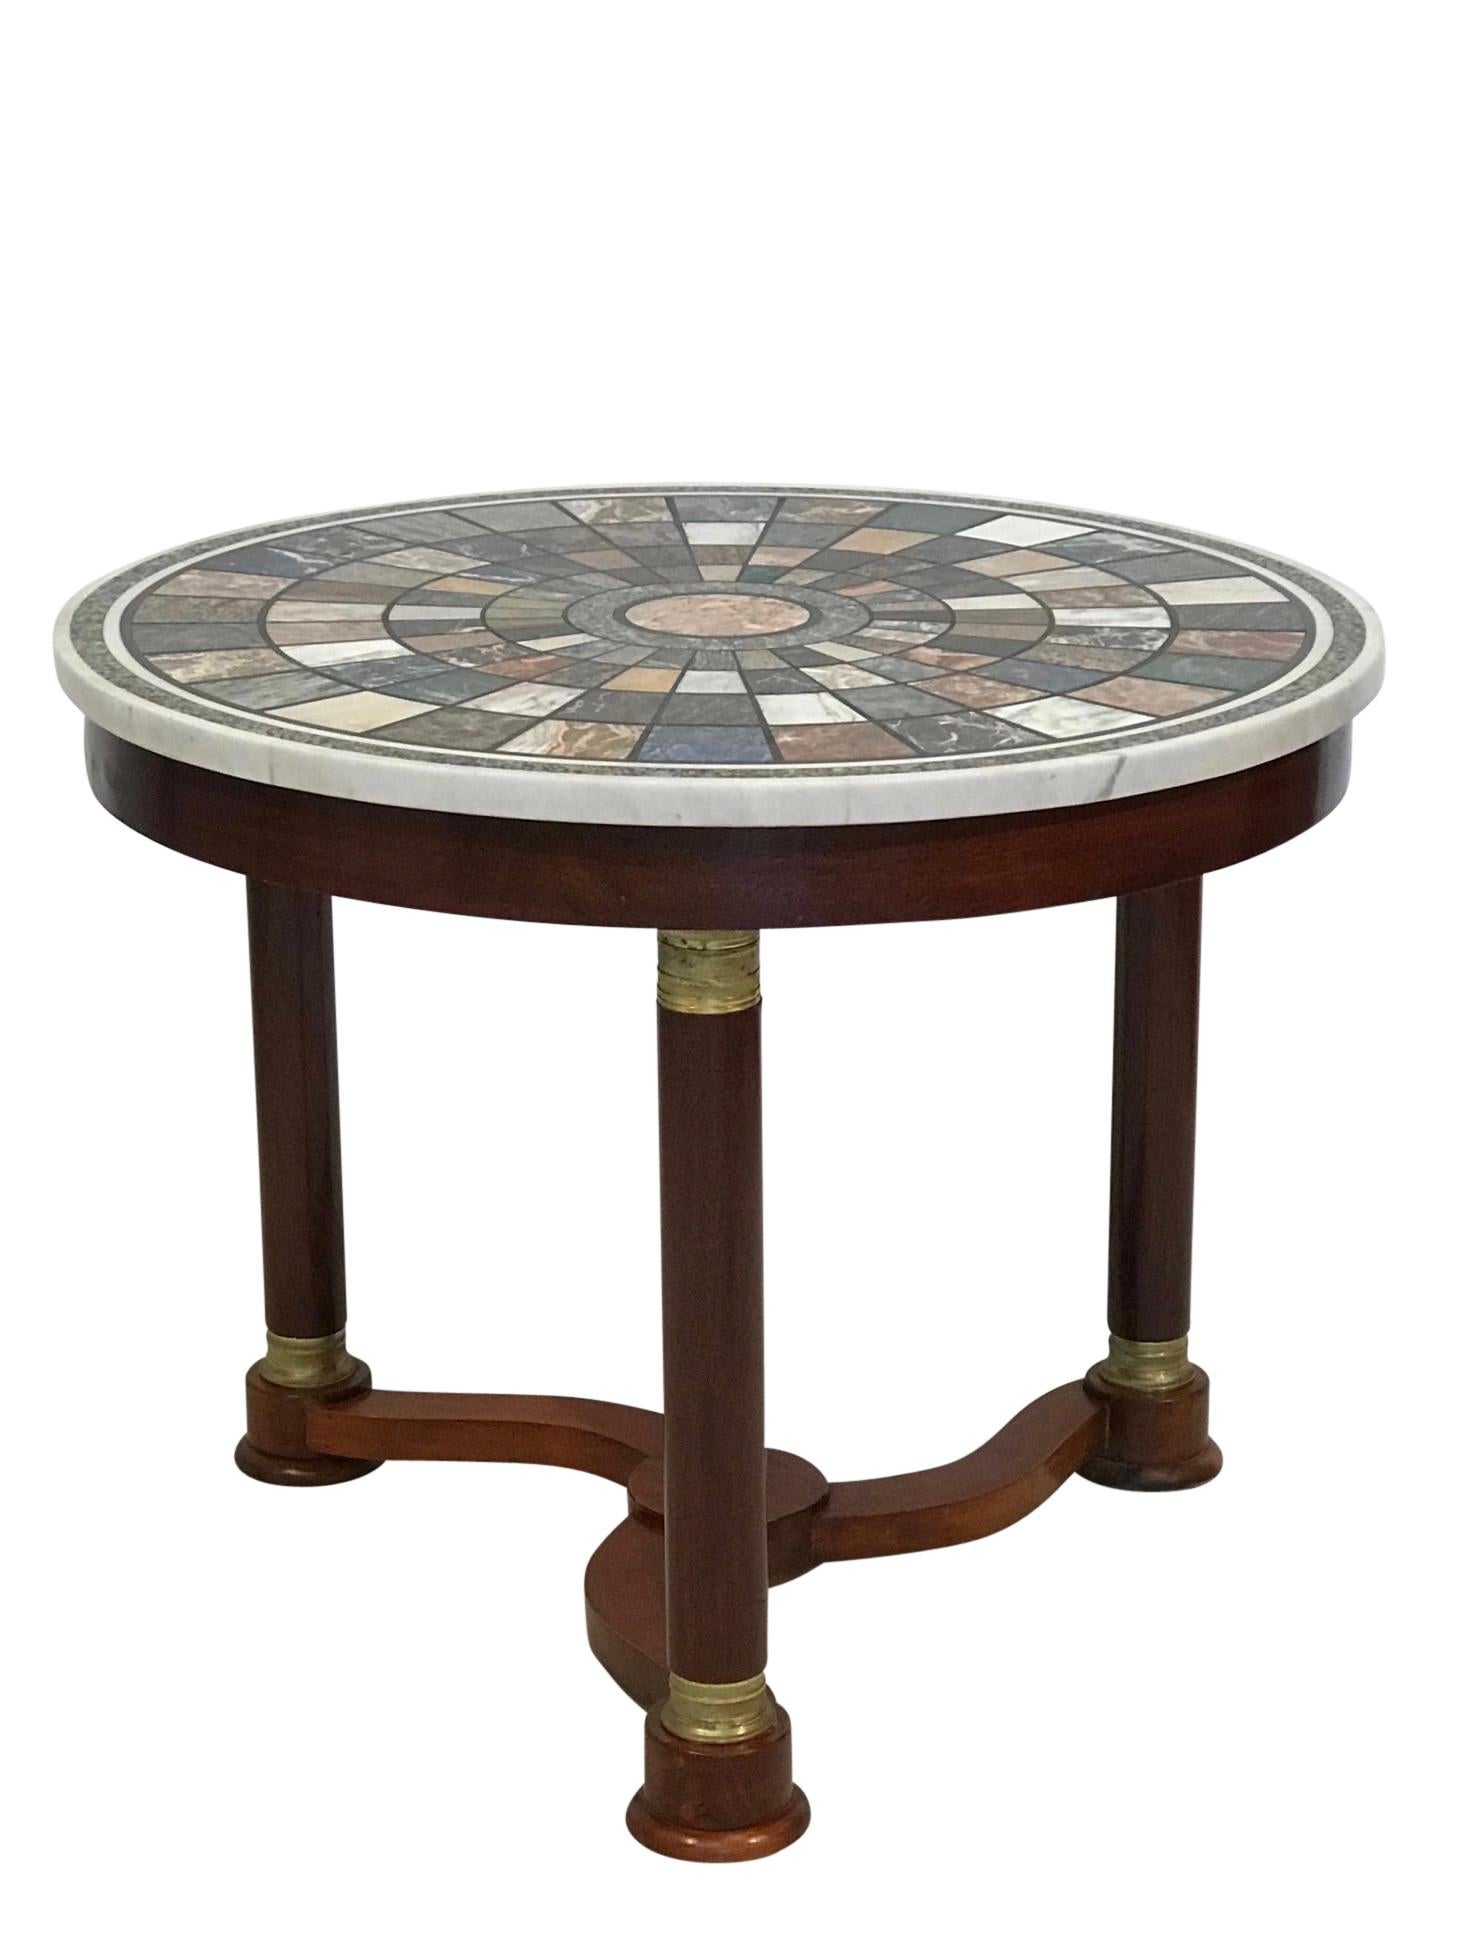 Handsome mahogany round center table with brass mounts on the legs and a multi-stone specimen top.
France, early to mid-19th century.